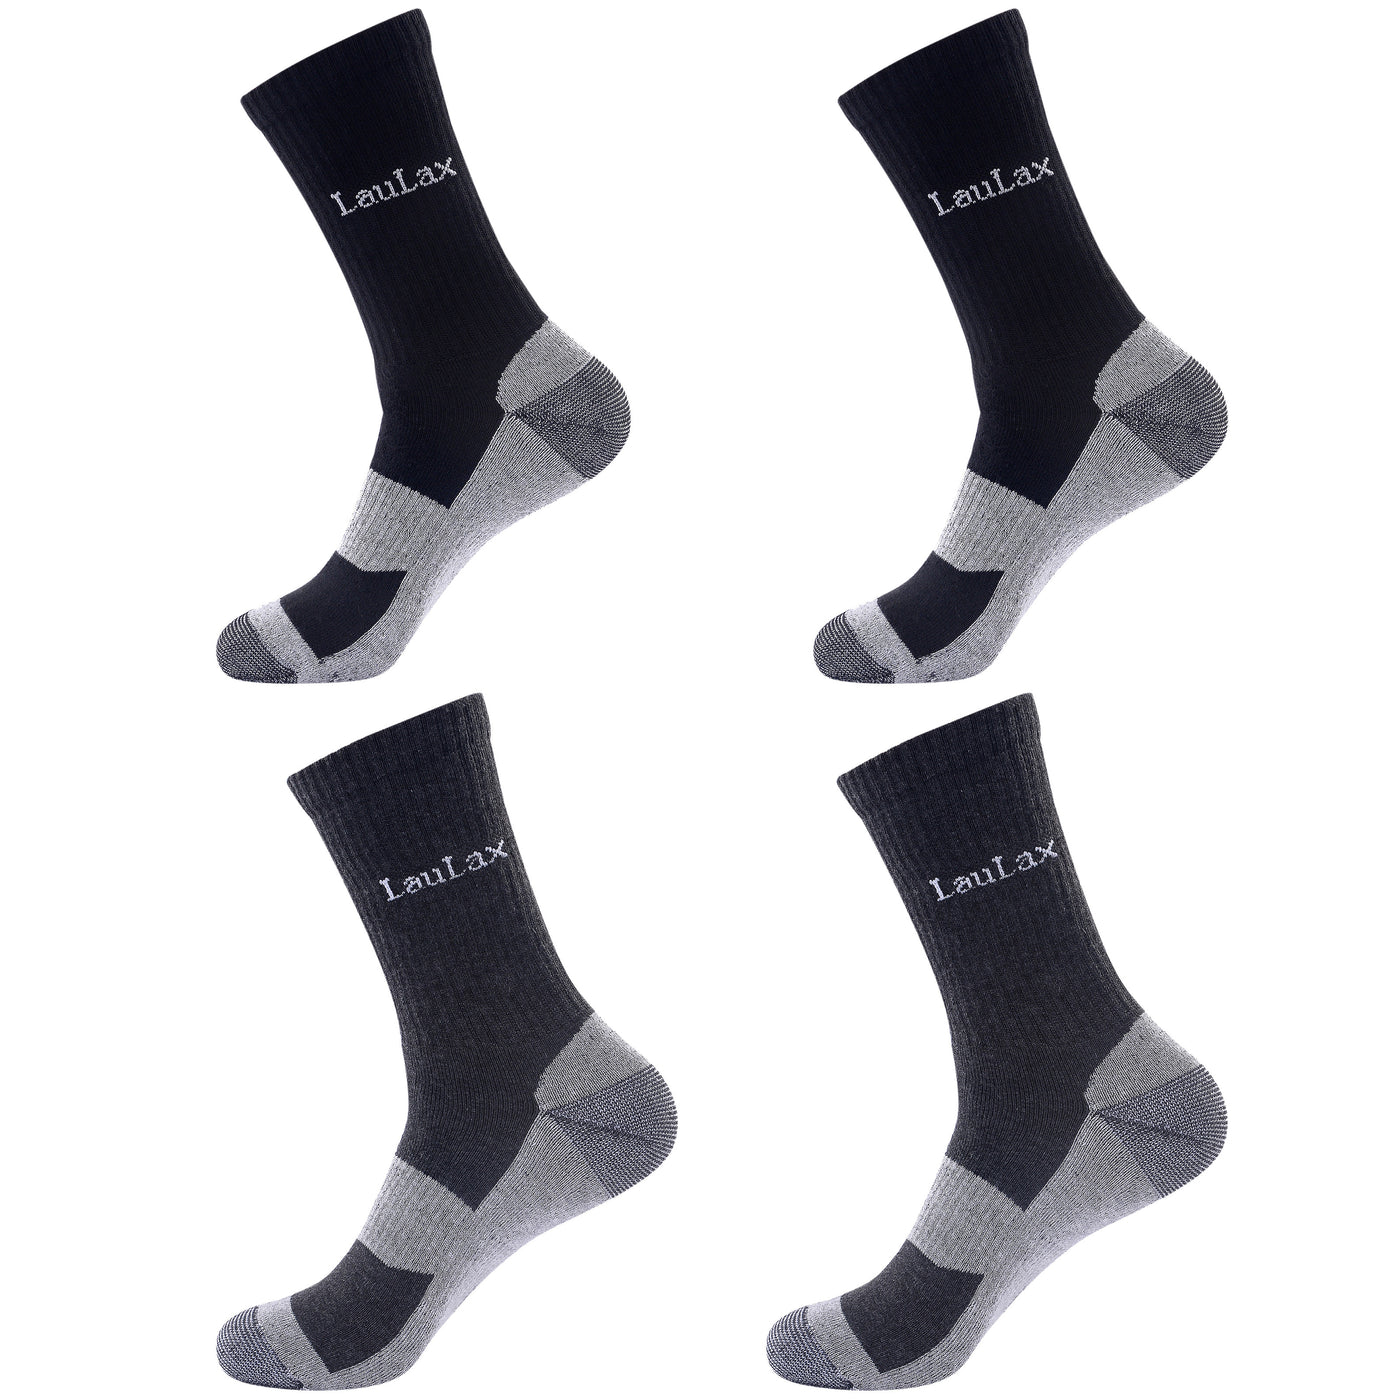 Laulax 4 Pairs High Quality Heavy Duty Work Socks, Gift Set, Comfort and Warmth